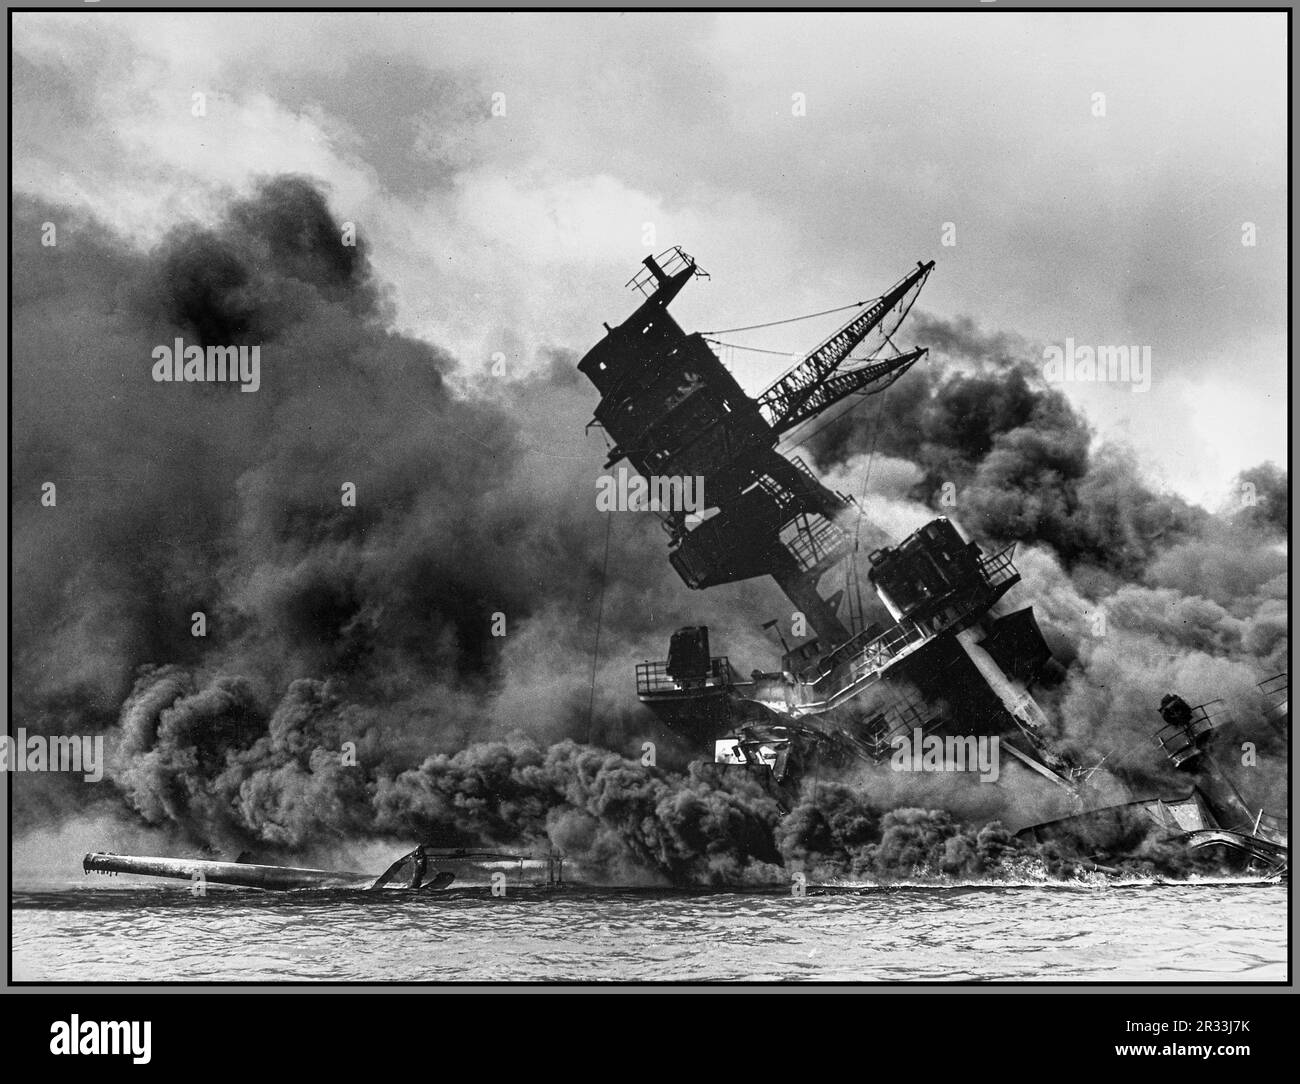 The USS Arizona (BB-39) burning after the Japanese attack on Pearl Harbor, 7 December 1941. USS Arizona sunk at Pearl Harbor. The ship is resting on the harbor bottom. The supporting structure of the forward tripod mast has collapsed after the forward magazine exploded. WW2 World War II Second World War Stock Photo